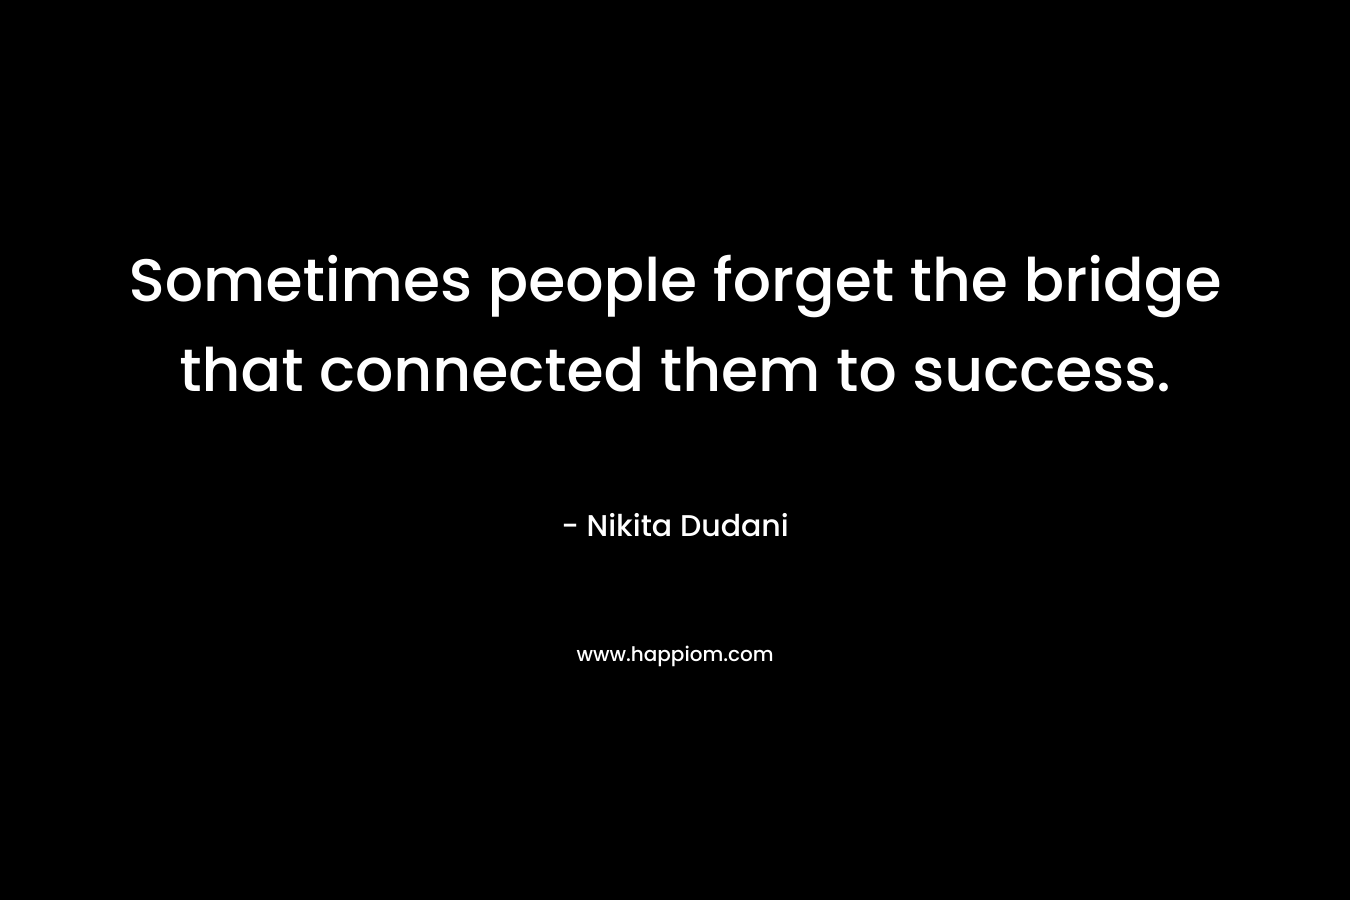 Sometimes people forget the bridge that connected them to success.